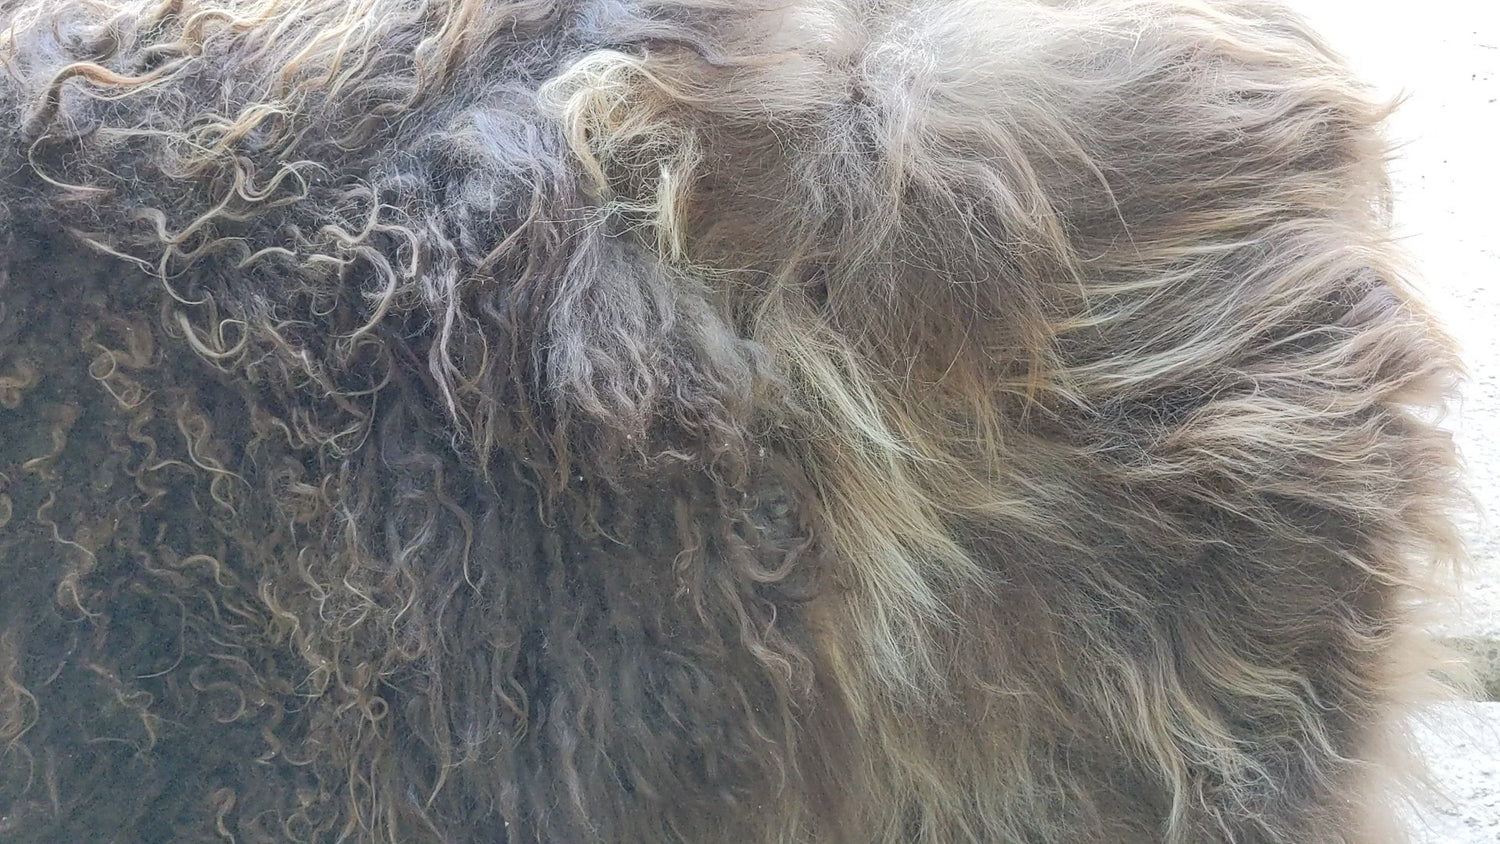 Video showing the detail of the texture of 3 different brown sheepskin rugs